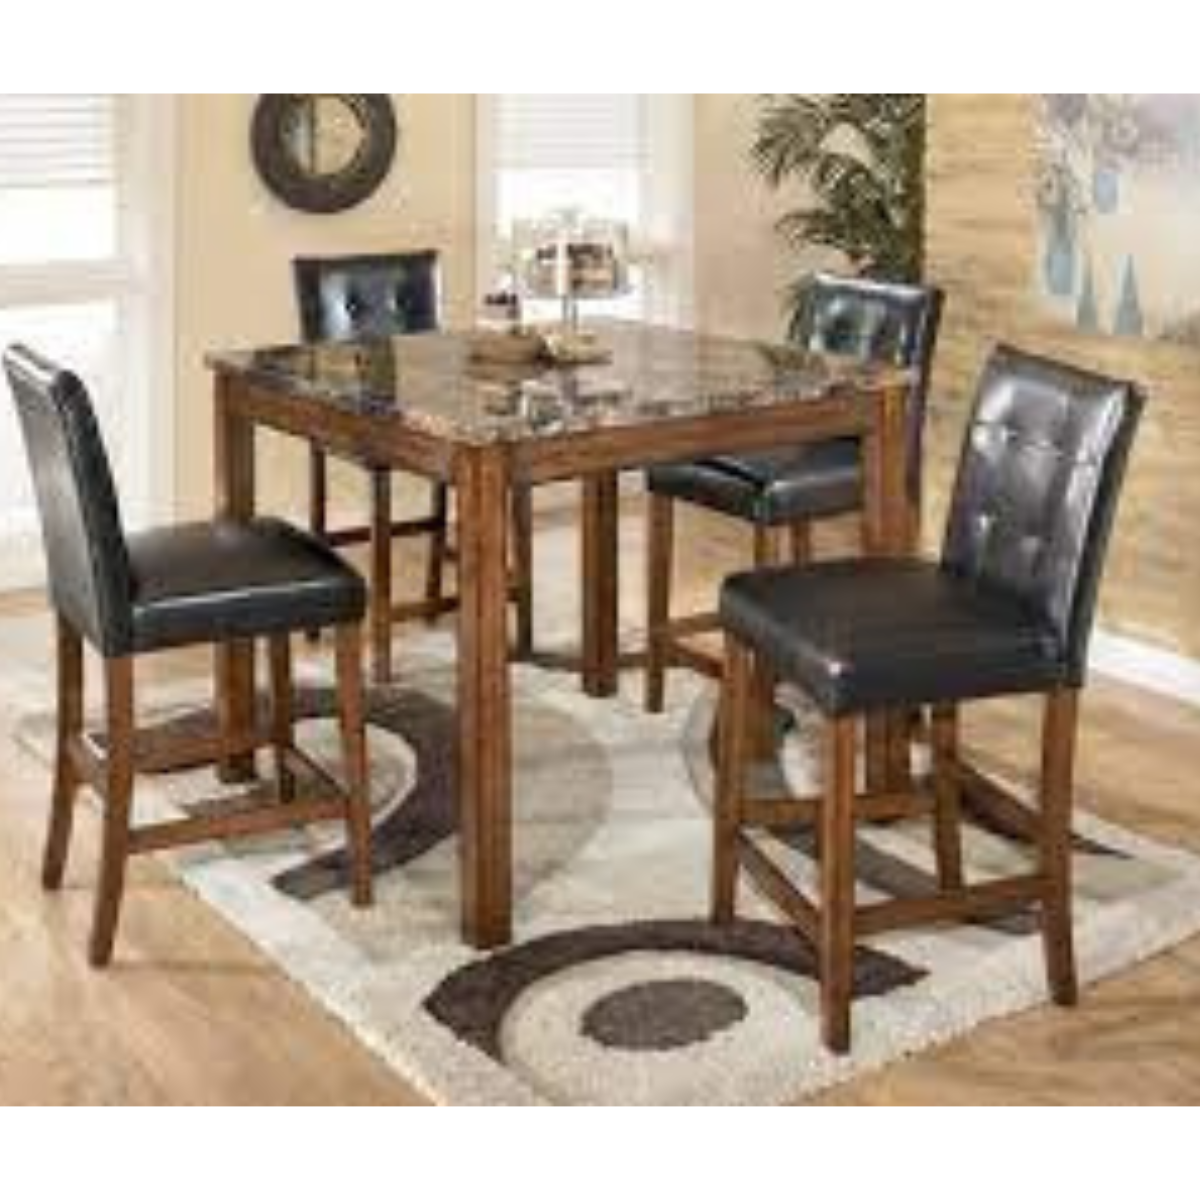 Ashley Theo Counter Height Dining Set D158-233 $889.00 90 Days Same as Cash*